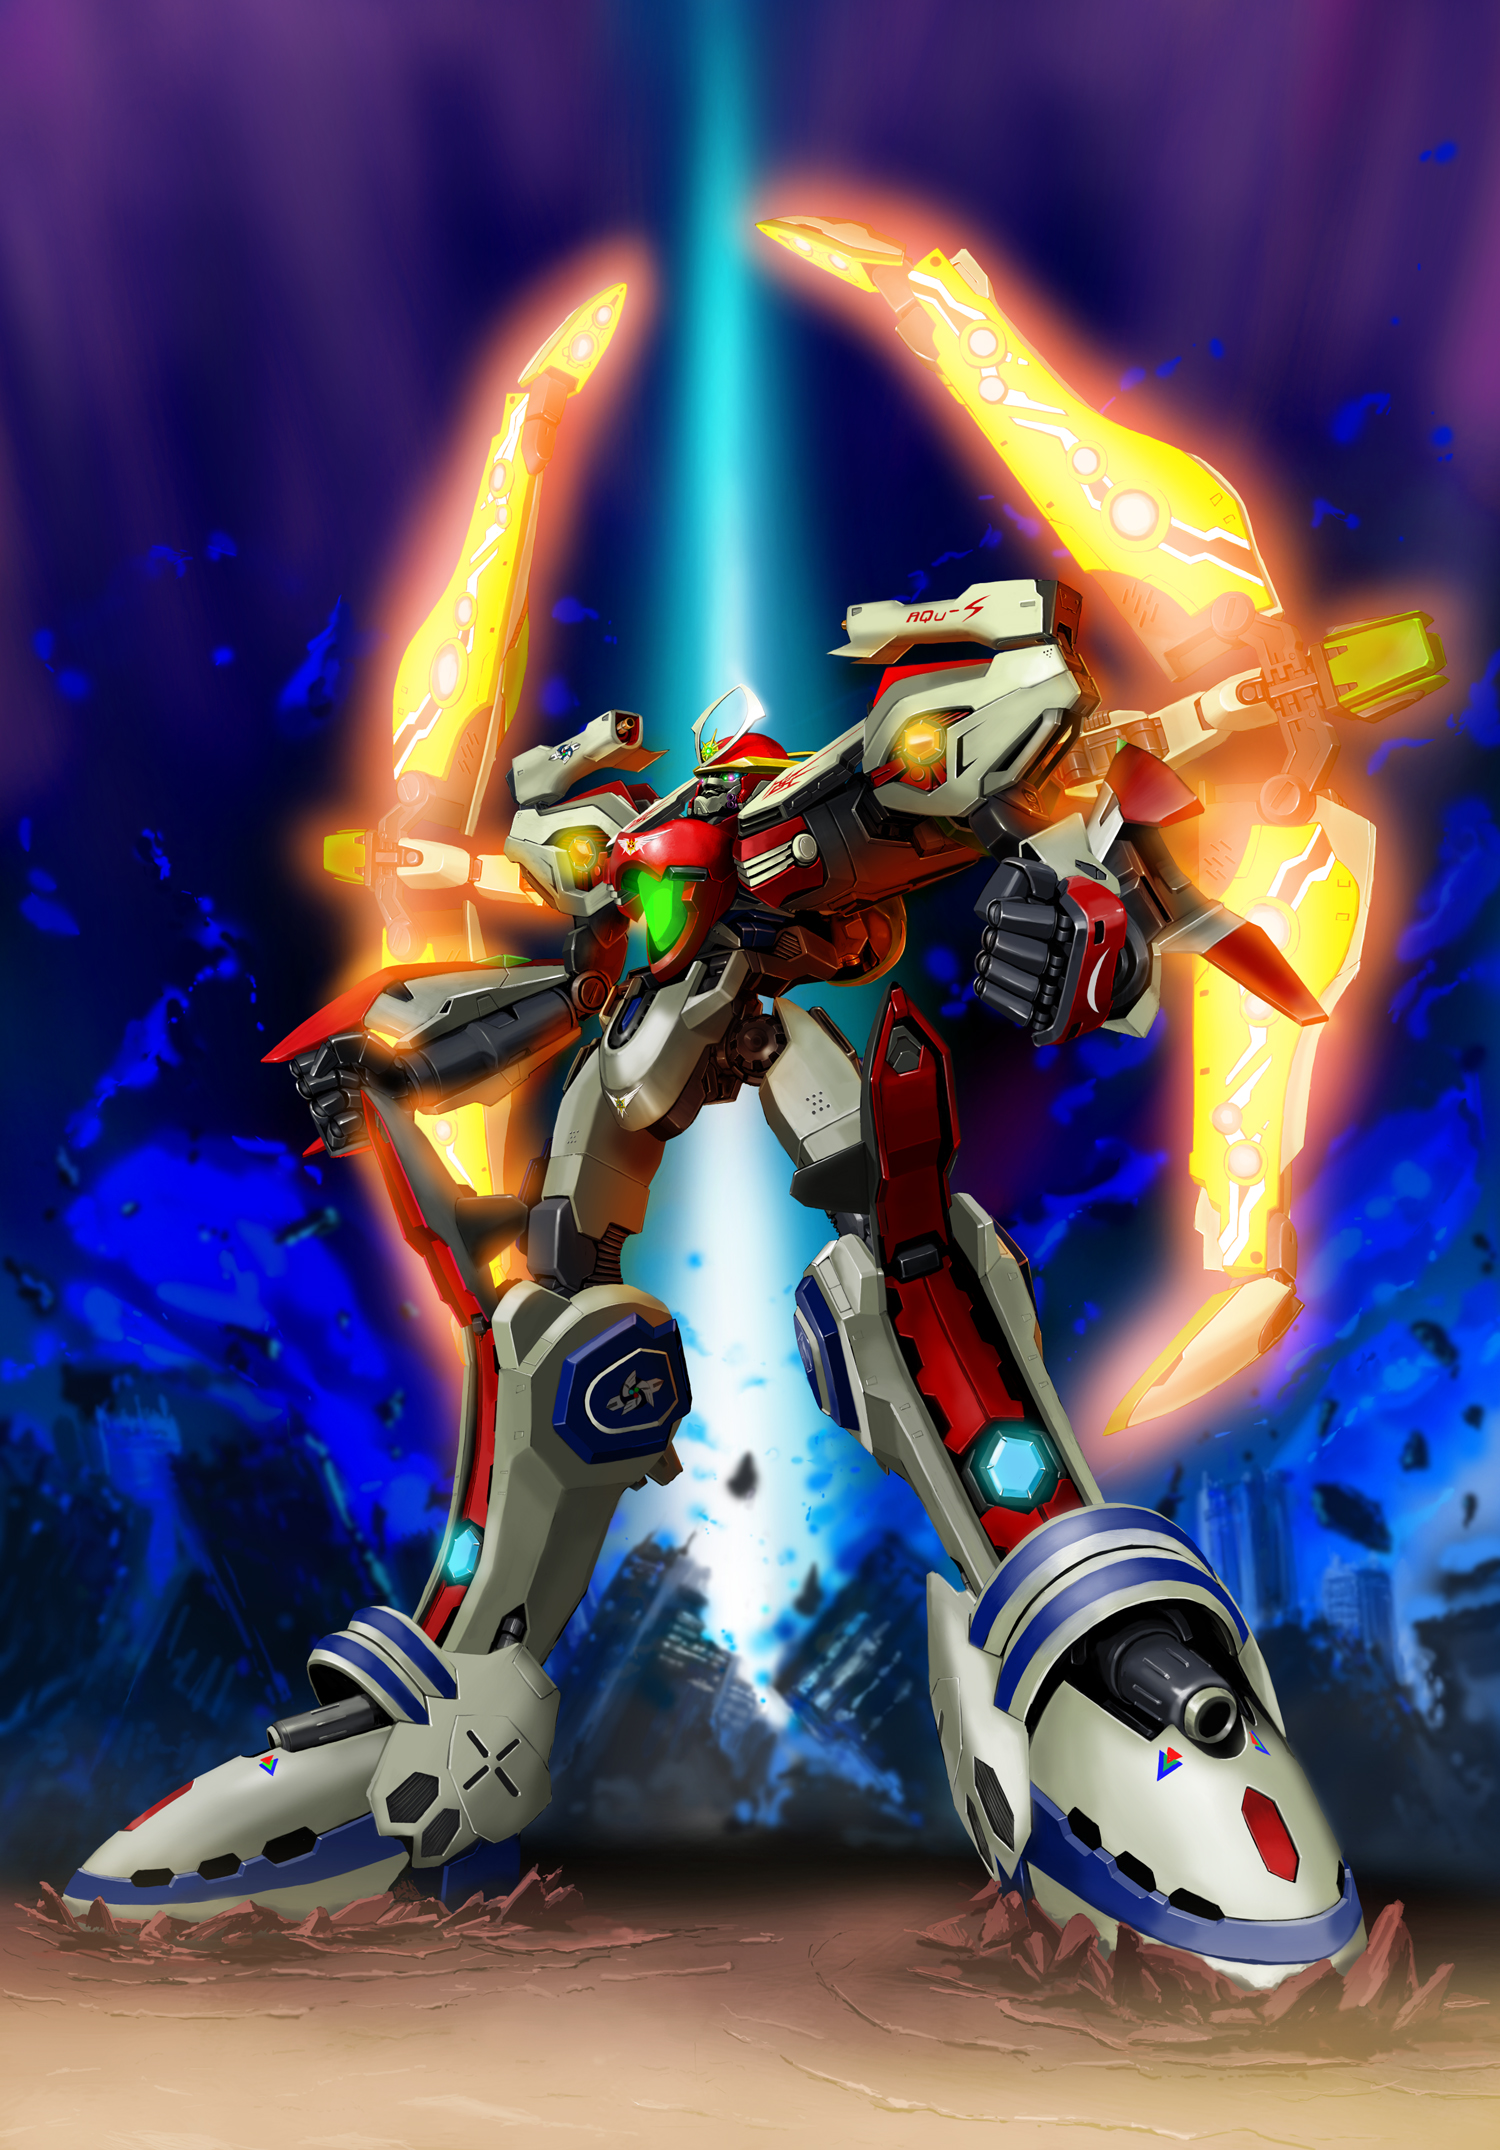 Aquarion Logos Review - Three If By Space